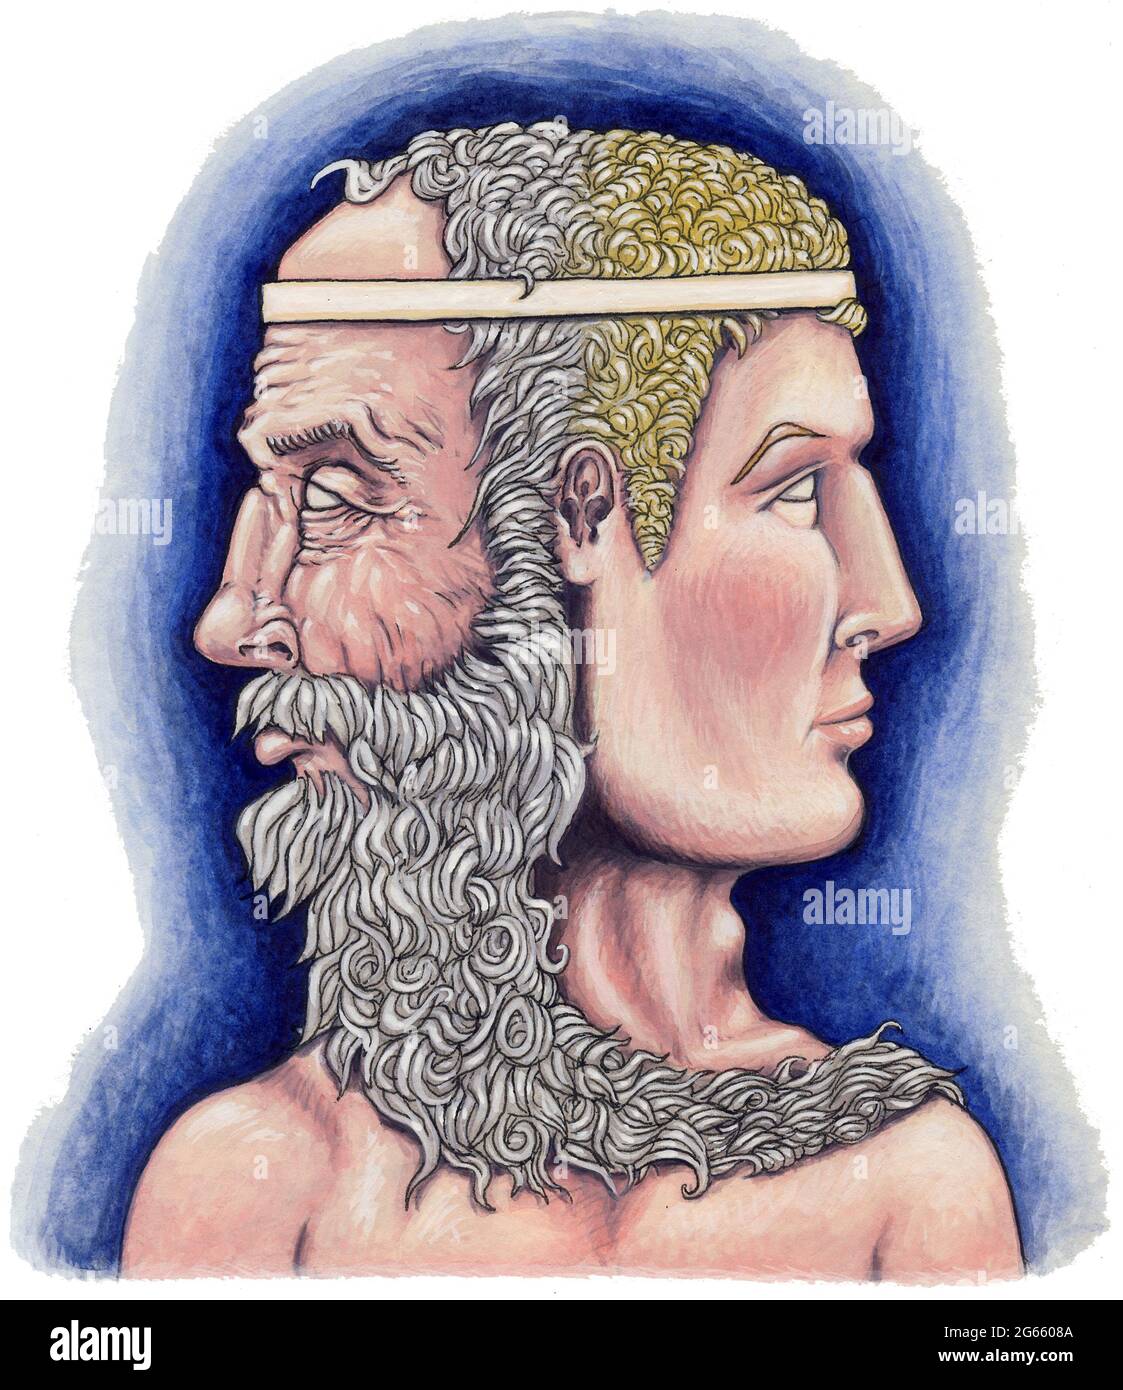 Art work illustration of the Roman god Janus with two faces, one young, one old Janus represented time, transitions, duality, beginning and end of war Stock Photo